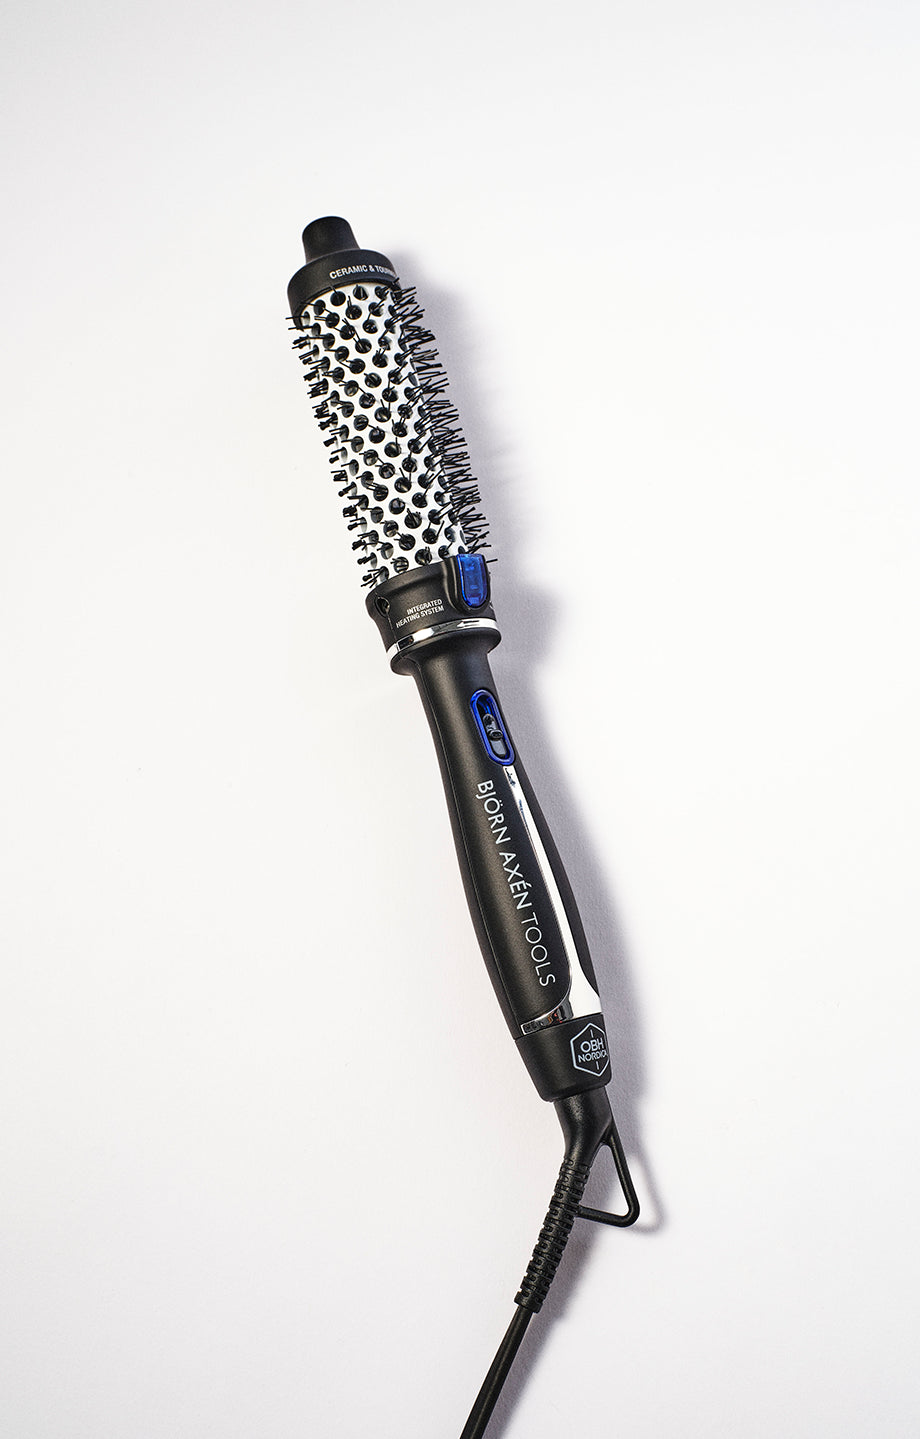 The ultimate styling brush and Sweden's best-selling styling tool